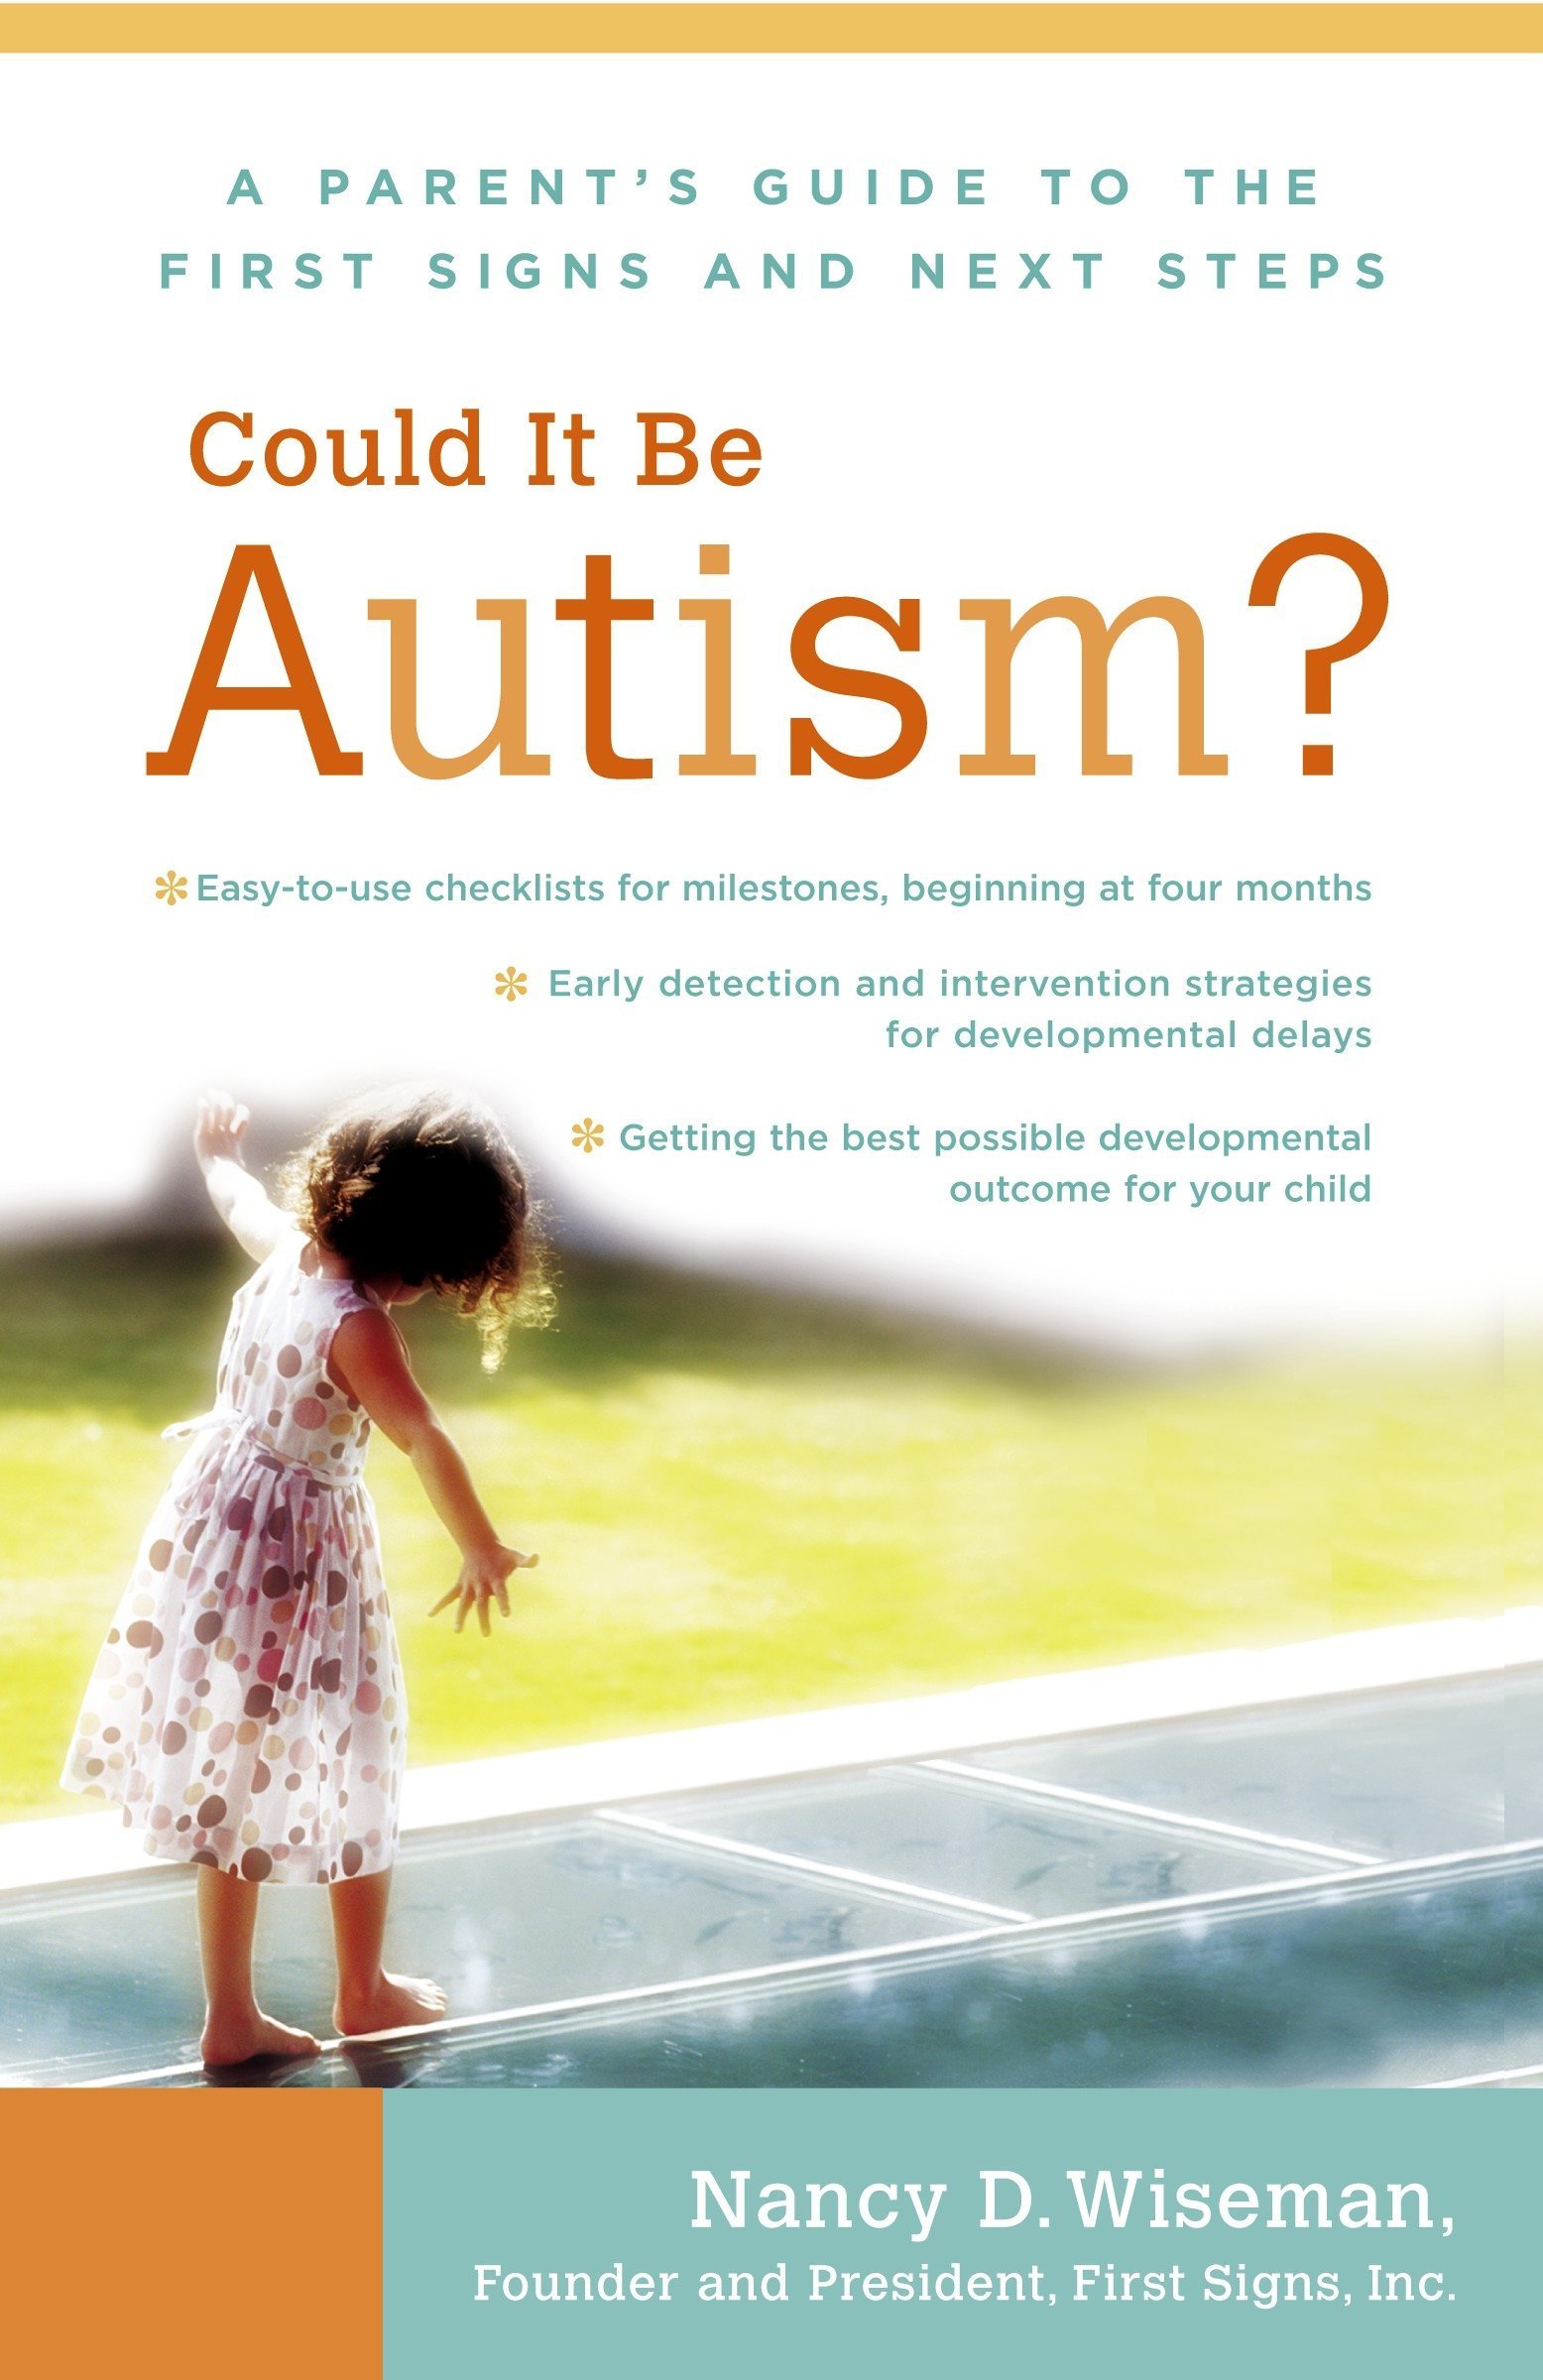 How Can I Tell If My Baby Is Autistic